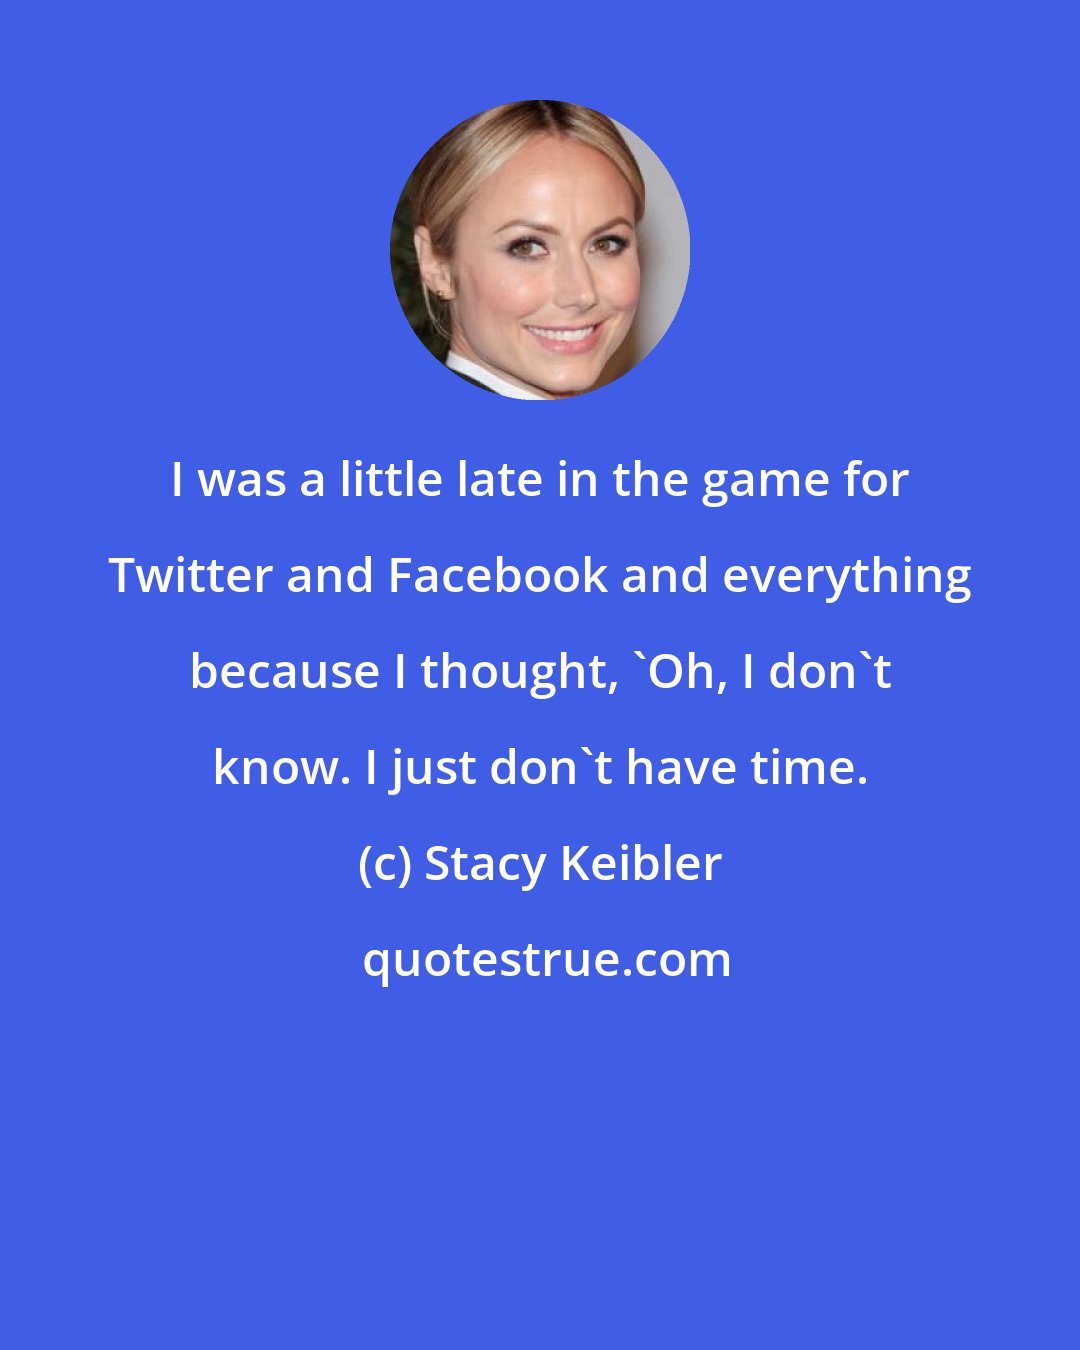 Stacy Keibler: I was a little late in the game for Twitter and Facebook and everything because I thought, 'Oh, I don't know. I just don't have time.